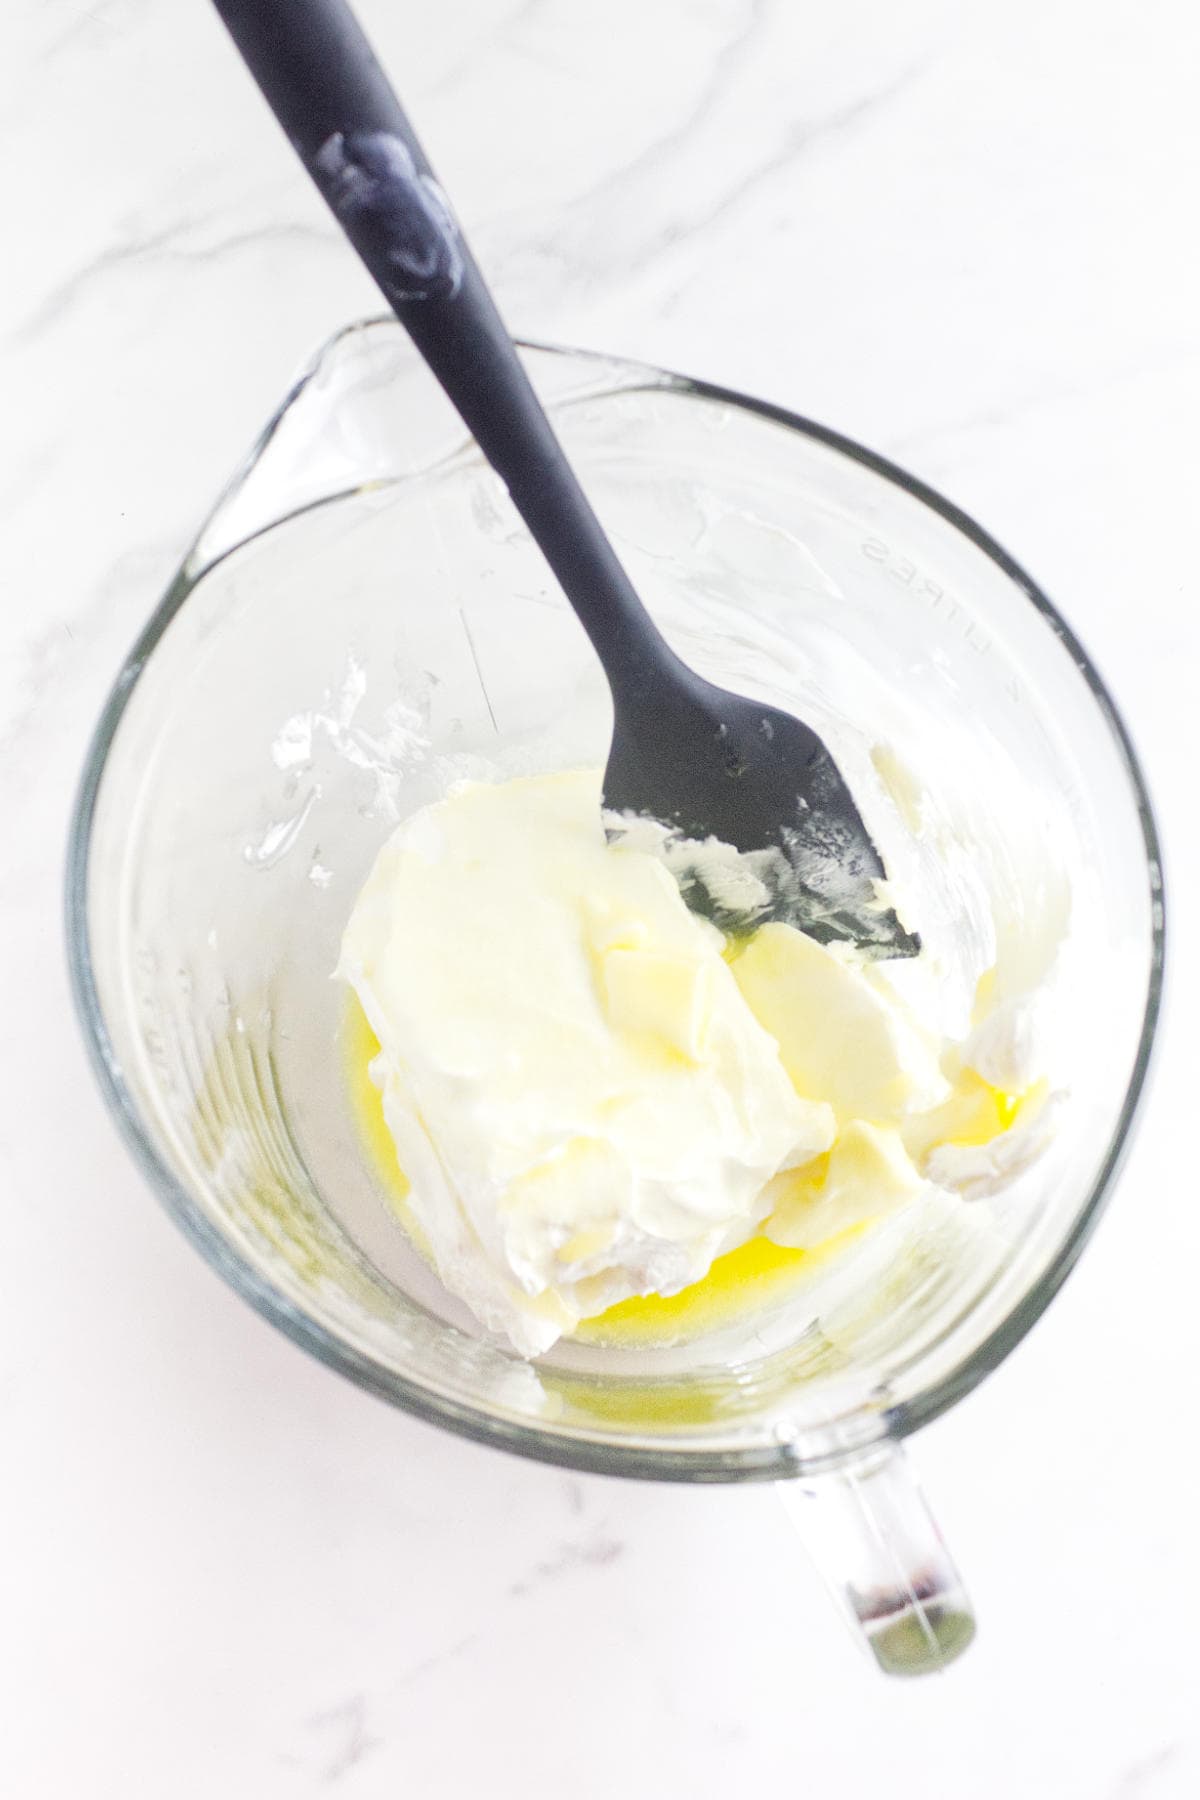 Cream cheese and butter in a mixing bowl.